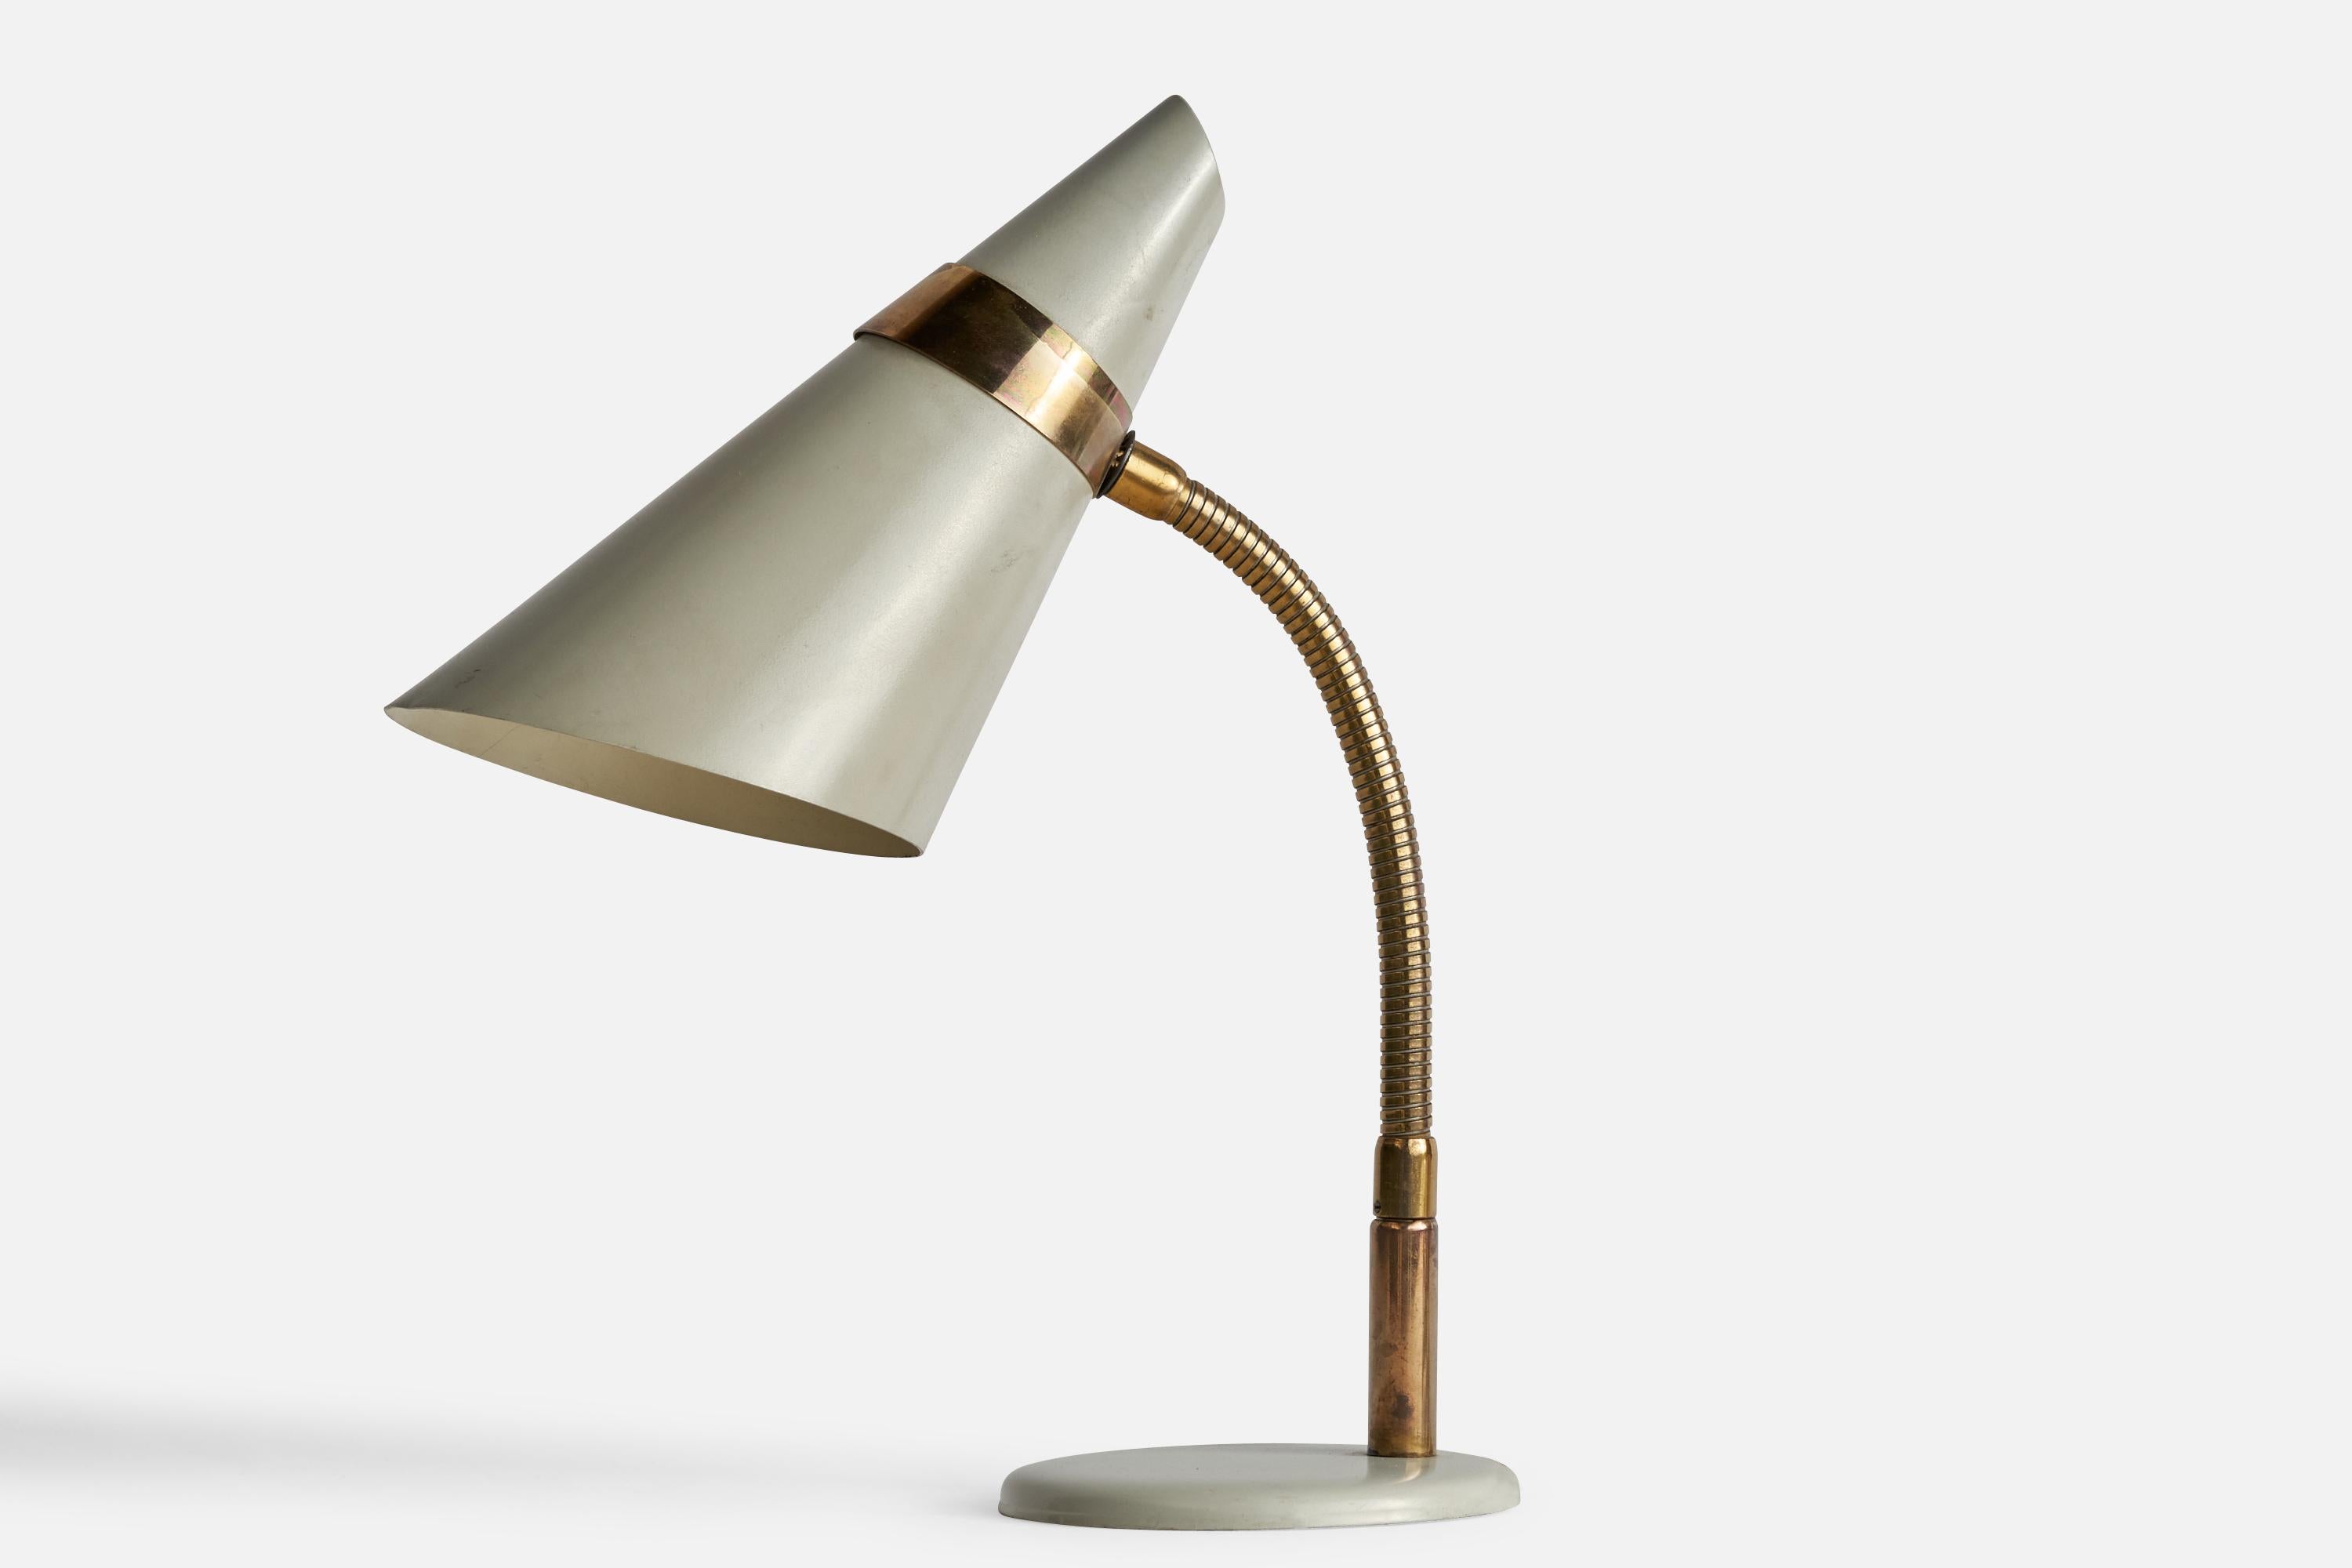 An adjustable brass and grey-lacquered metal table lamp designed and produced by Idman, Finland, 1960s.

Overall Dimensions (inches): 13” H x 5” Diameter 
Bulb Specifications: E-26 Bulb
Number of Sockets: 1
All lighting will be converted for US